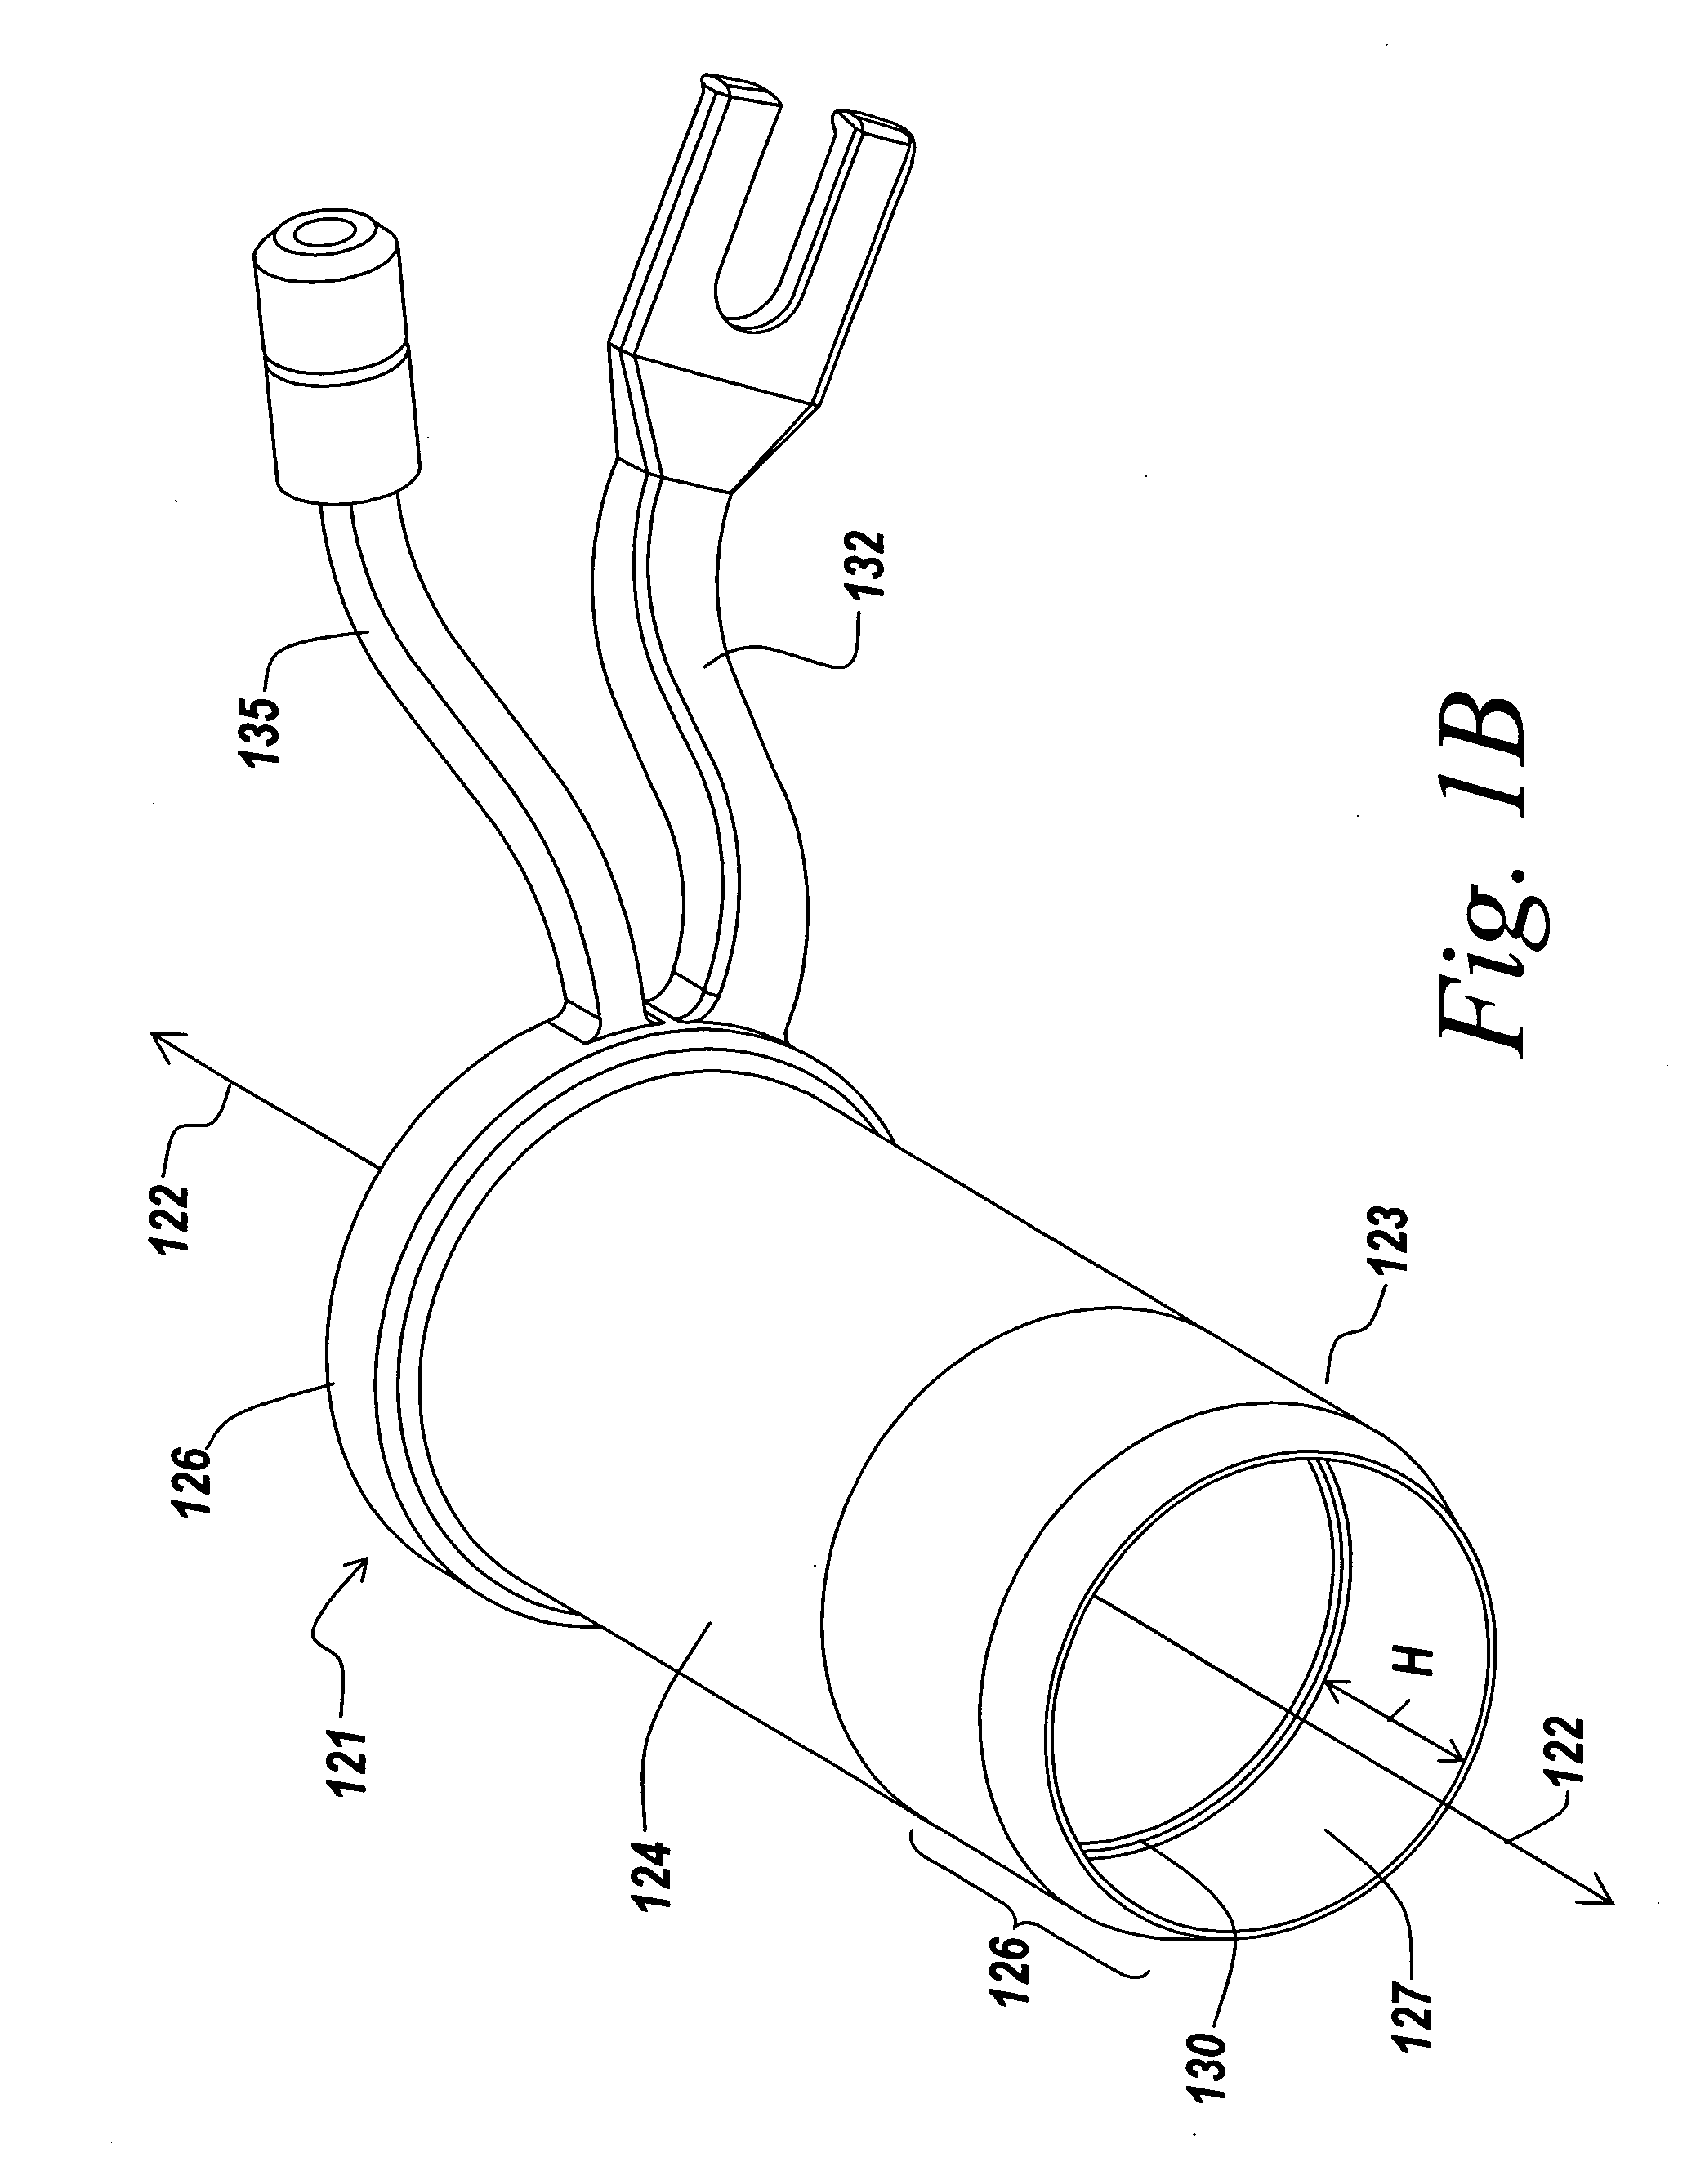 Illuminated surgical access system including a surgical access device and integrated light emitter